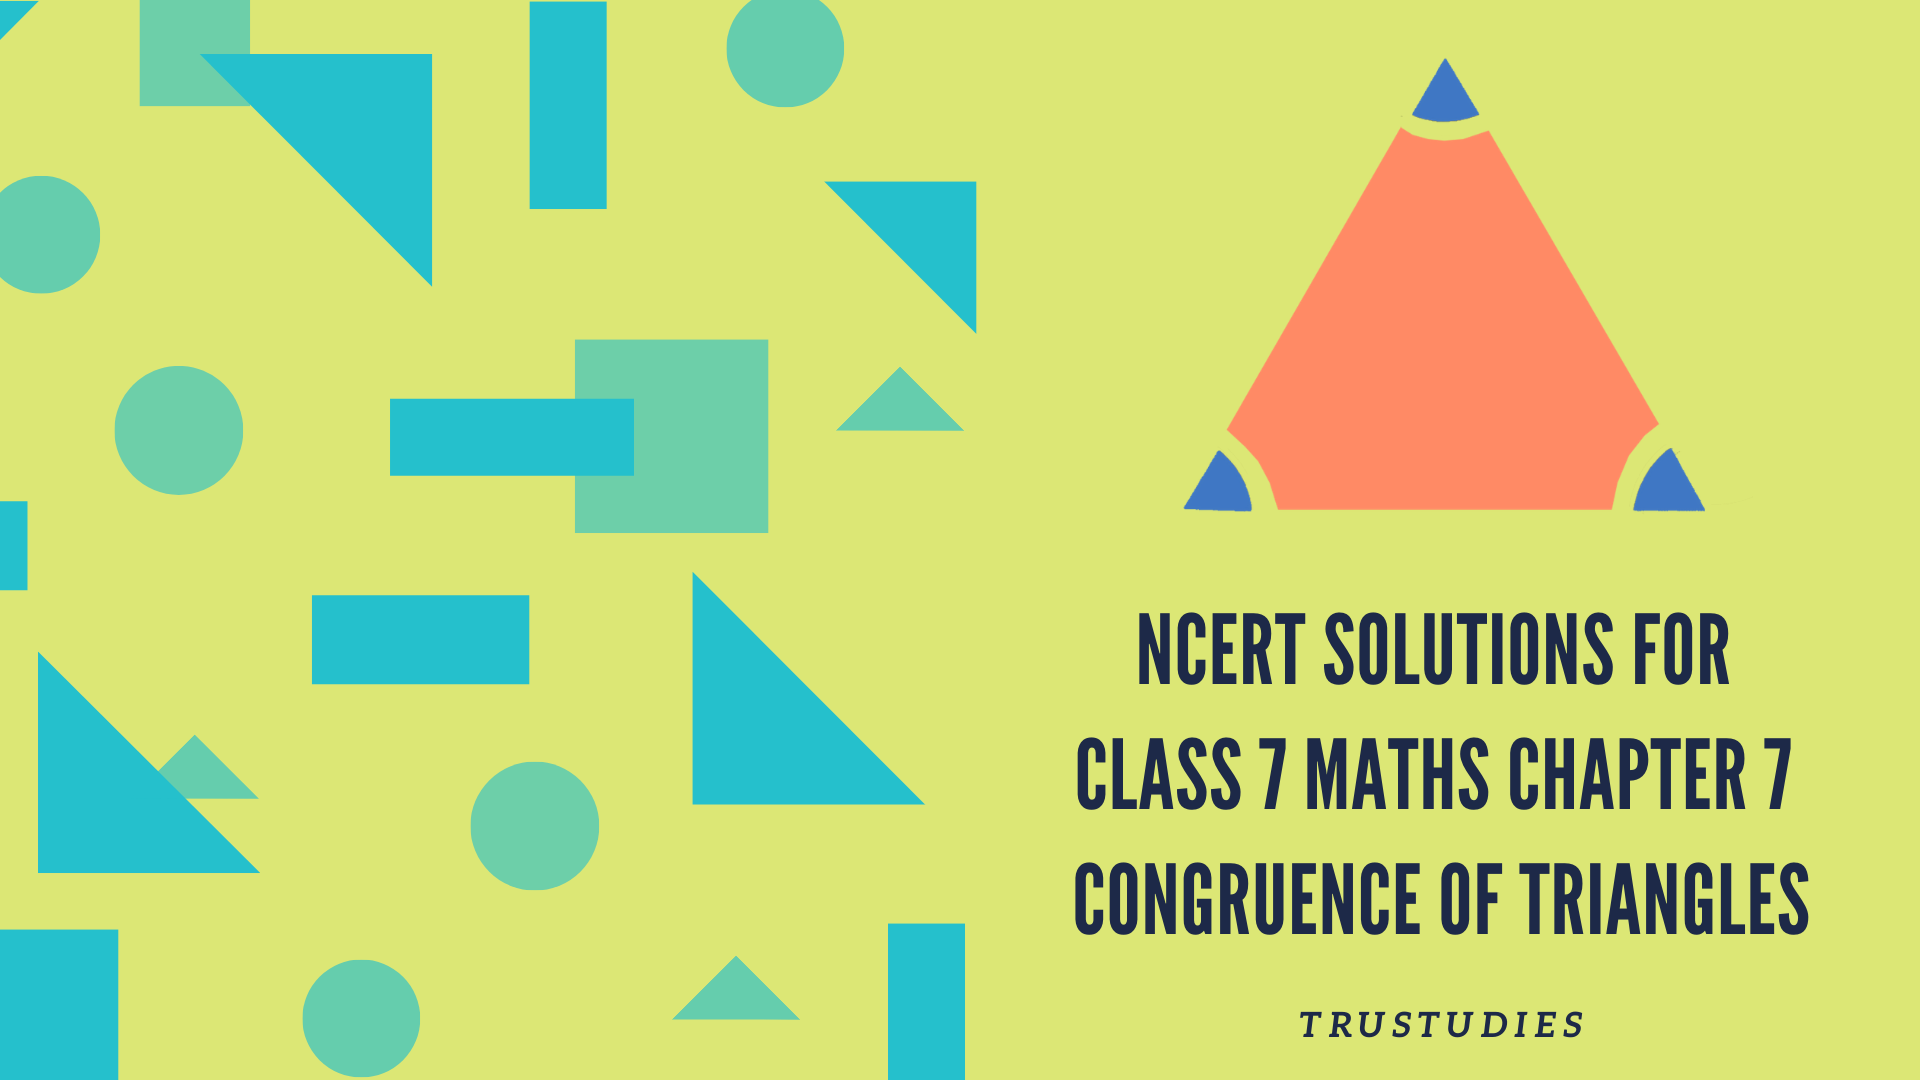 NCERT solutions for class 7 maths chapter 7 congruence of triangles banner image